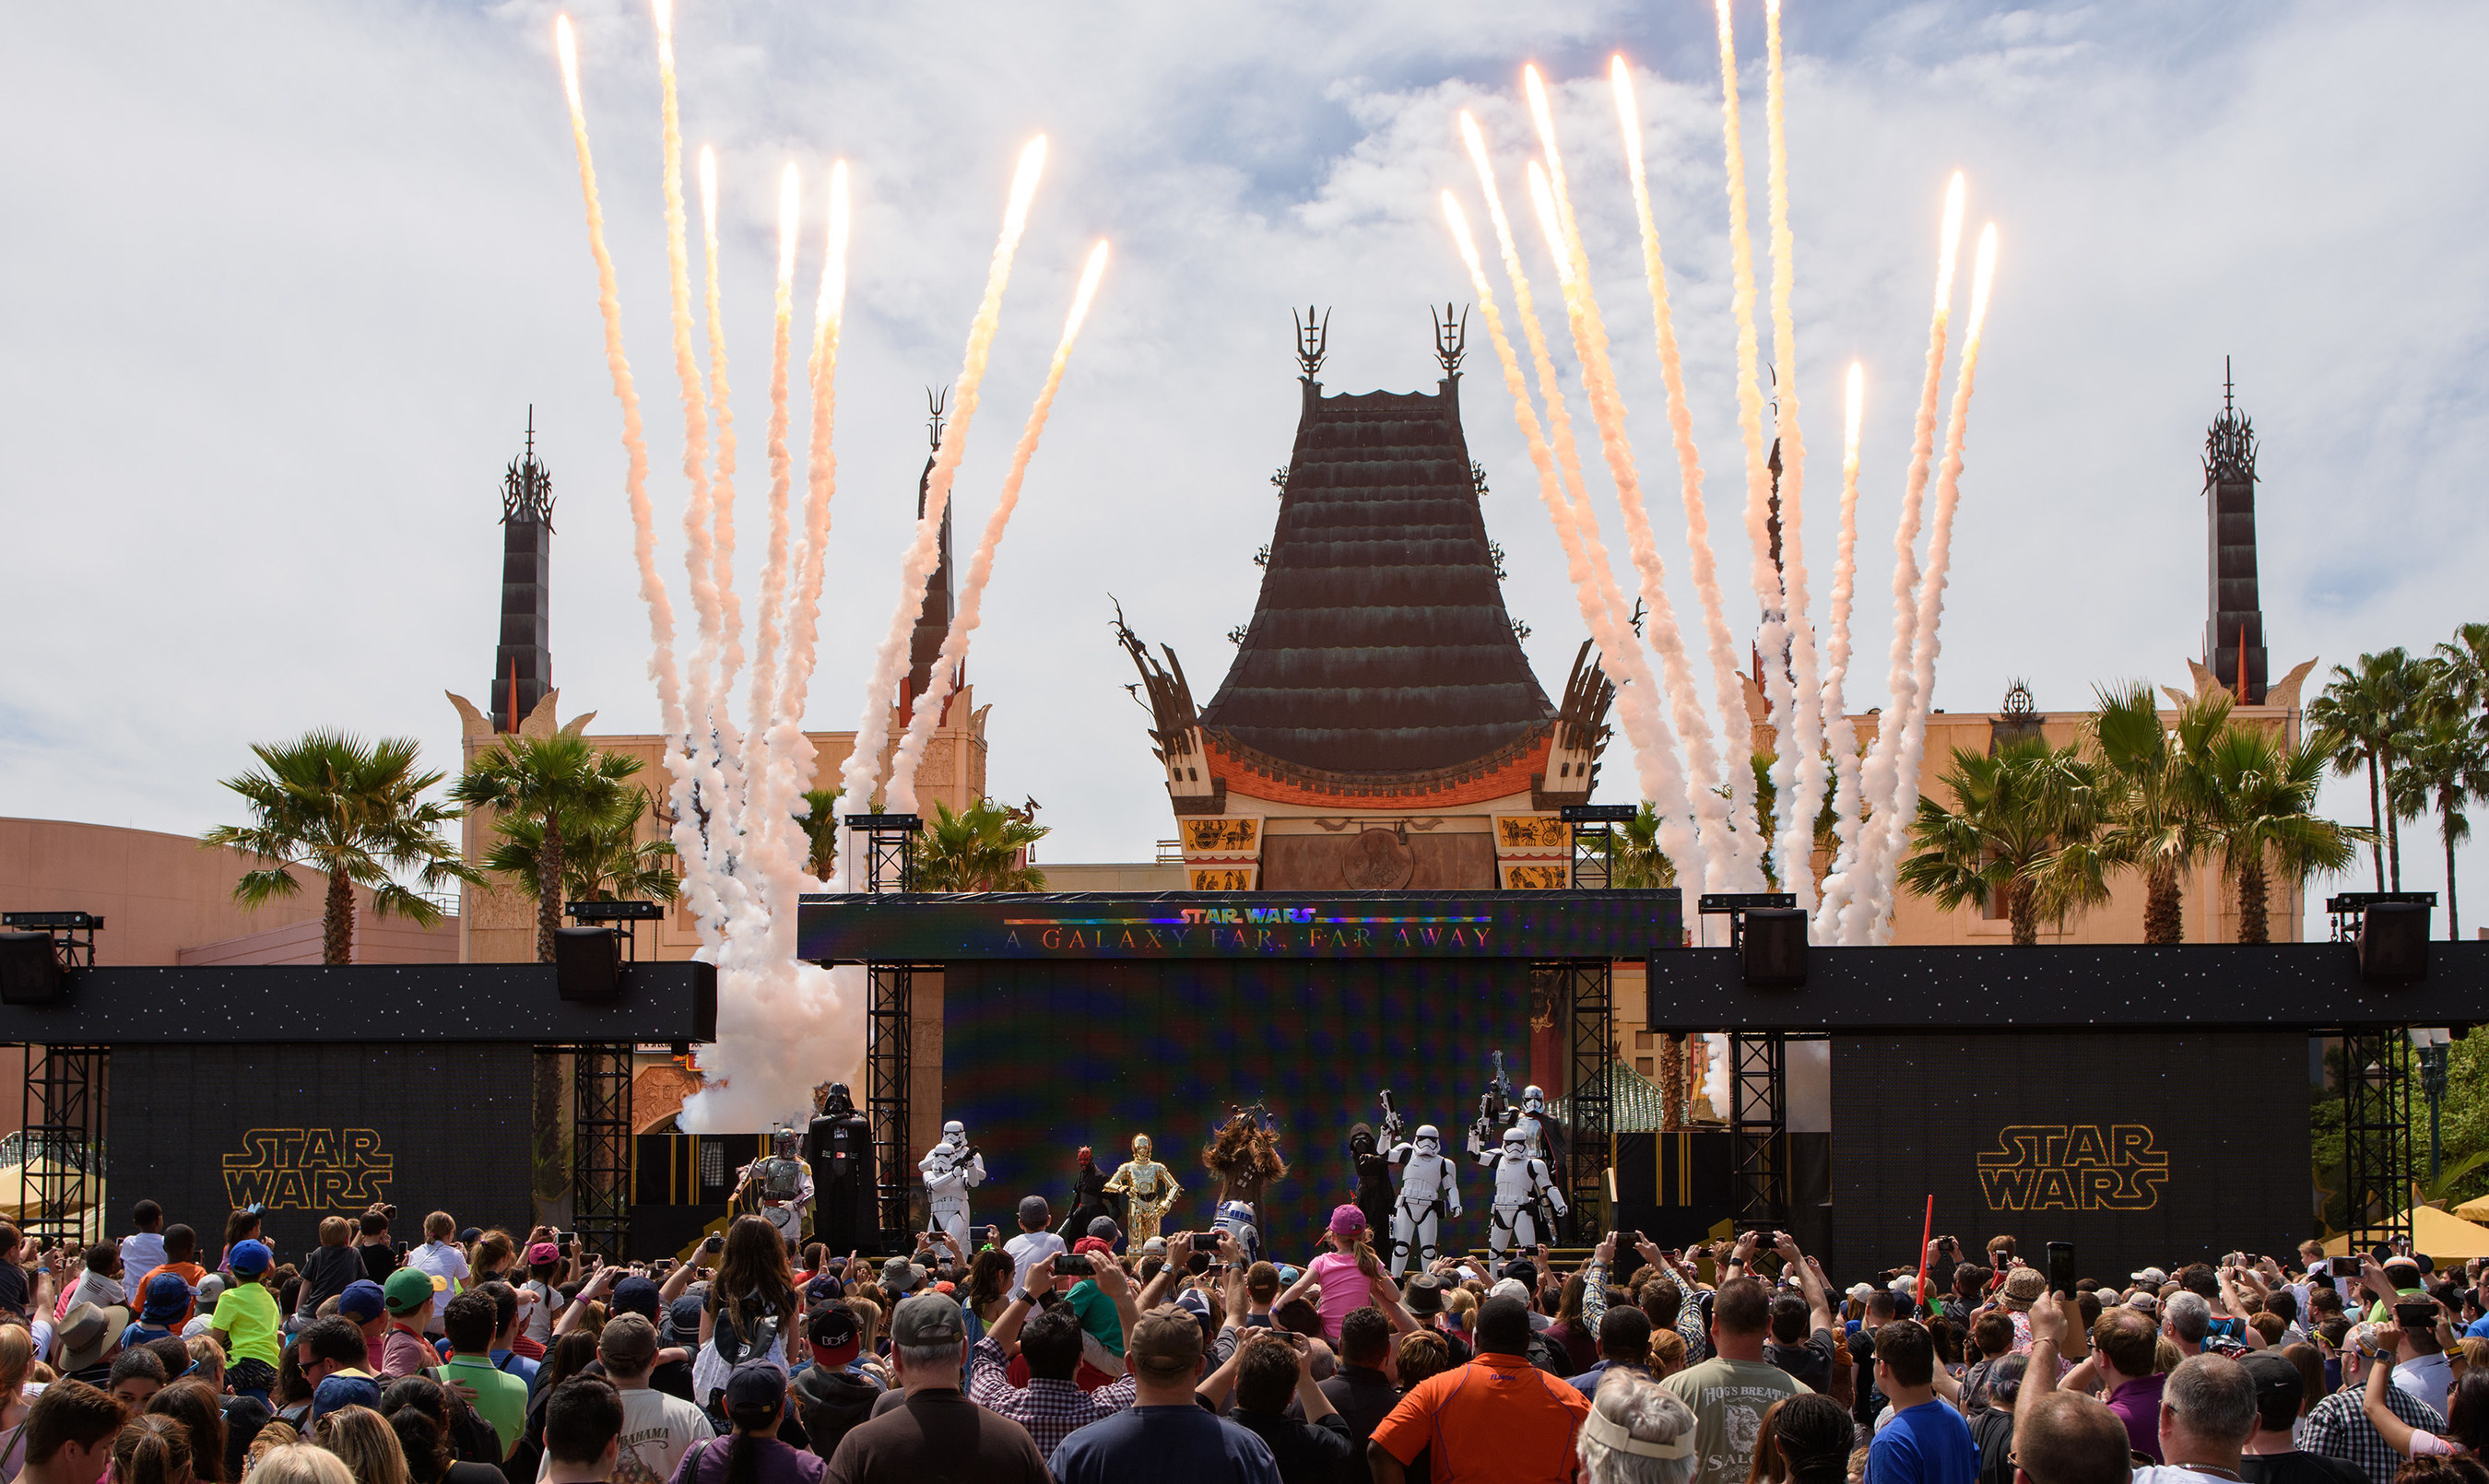 This new live, stage show celebrates iconic moments from the Star Wars saga with live vignettes featuring popular Star Wars characters, such as Kylo Ren, Chewbacca, Darth Vader and Darth Maul. The show takes place multiple times each day at the Center Stage area near The Great Movie Ride. (Todd Anderson, photographer)